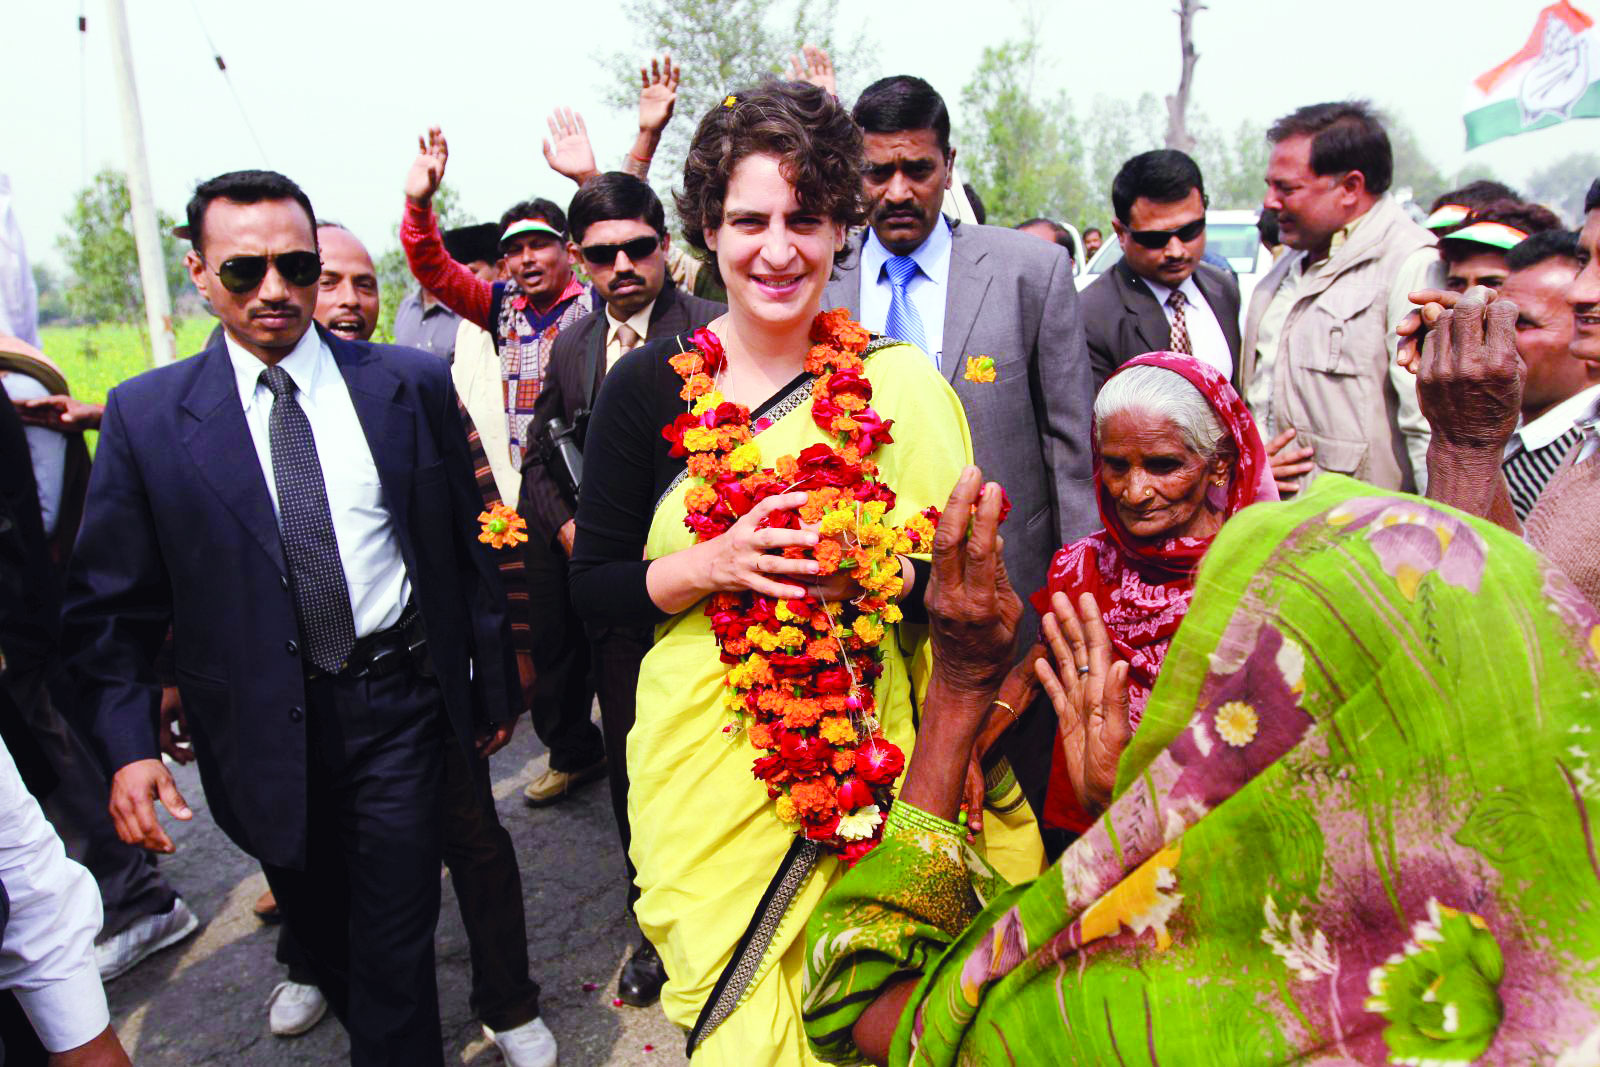 Cong might play Priyanka card in UP to rein in Modi